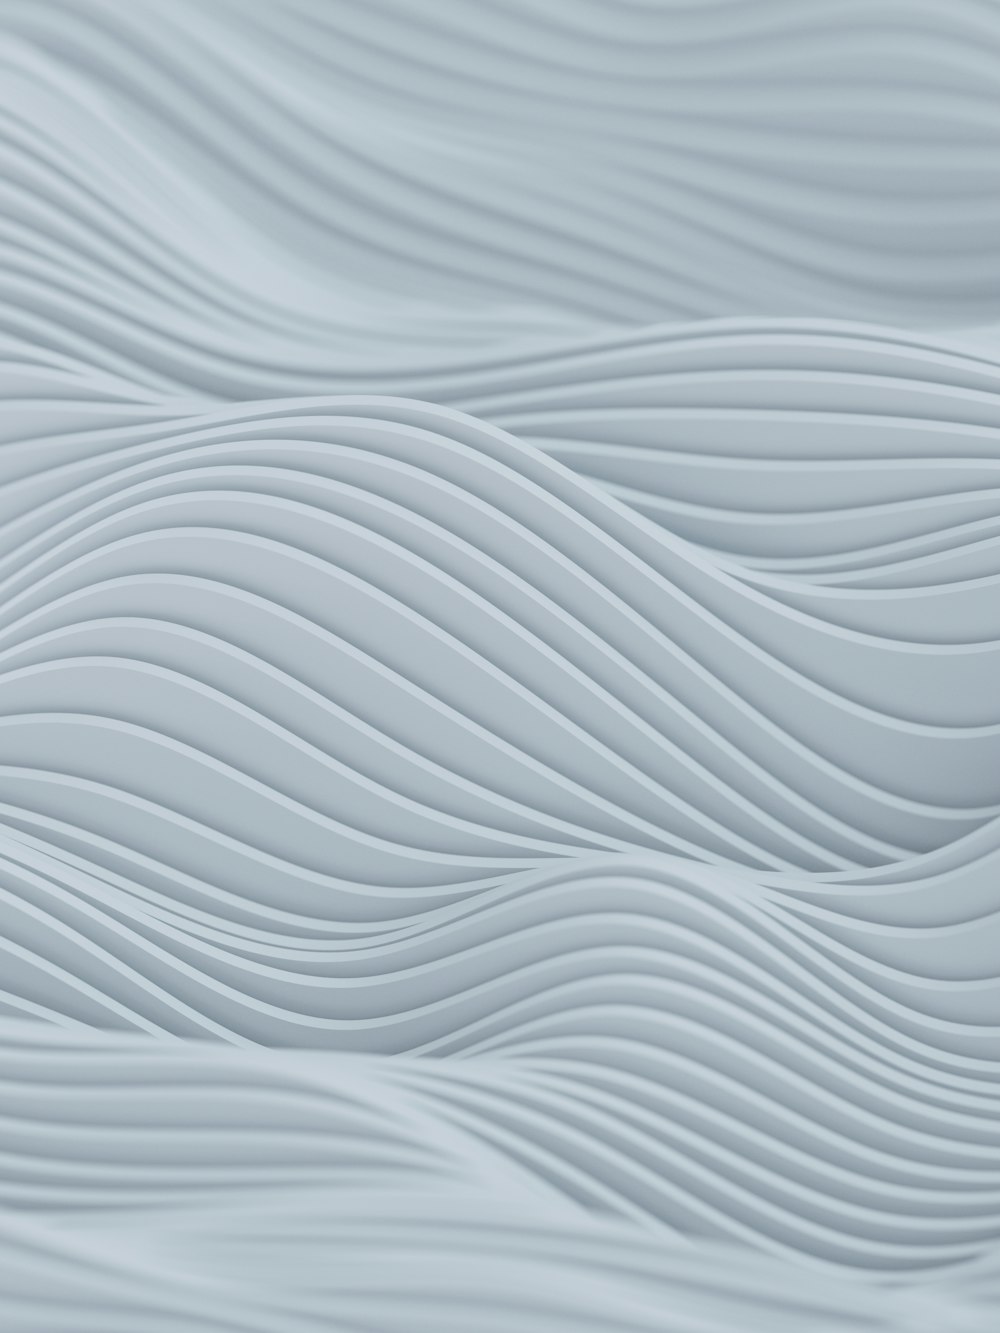 a close up view of a wall with wavy lines